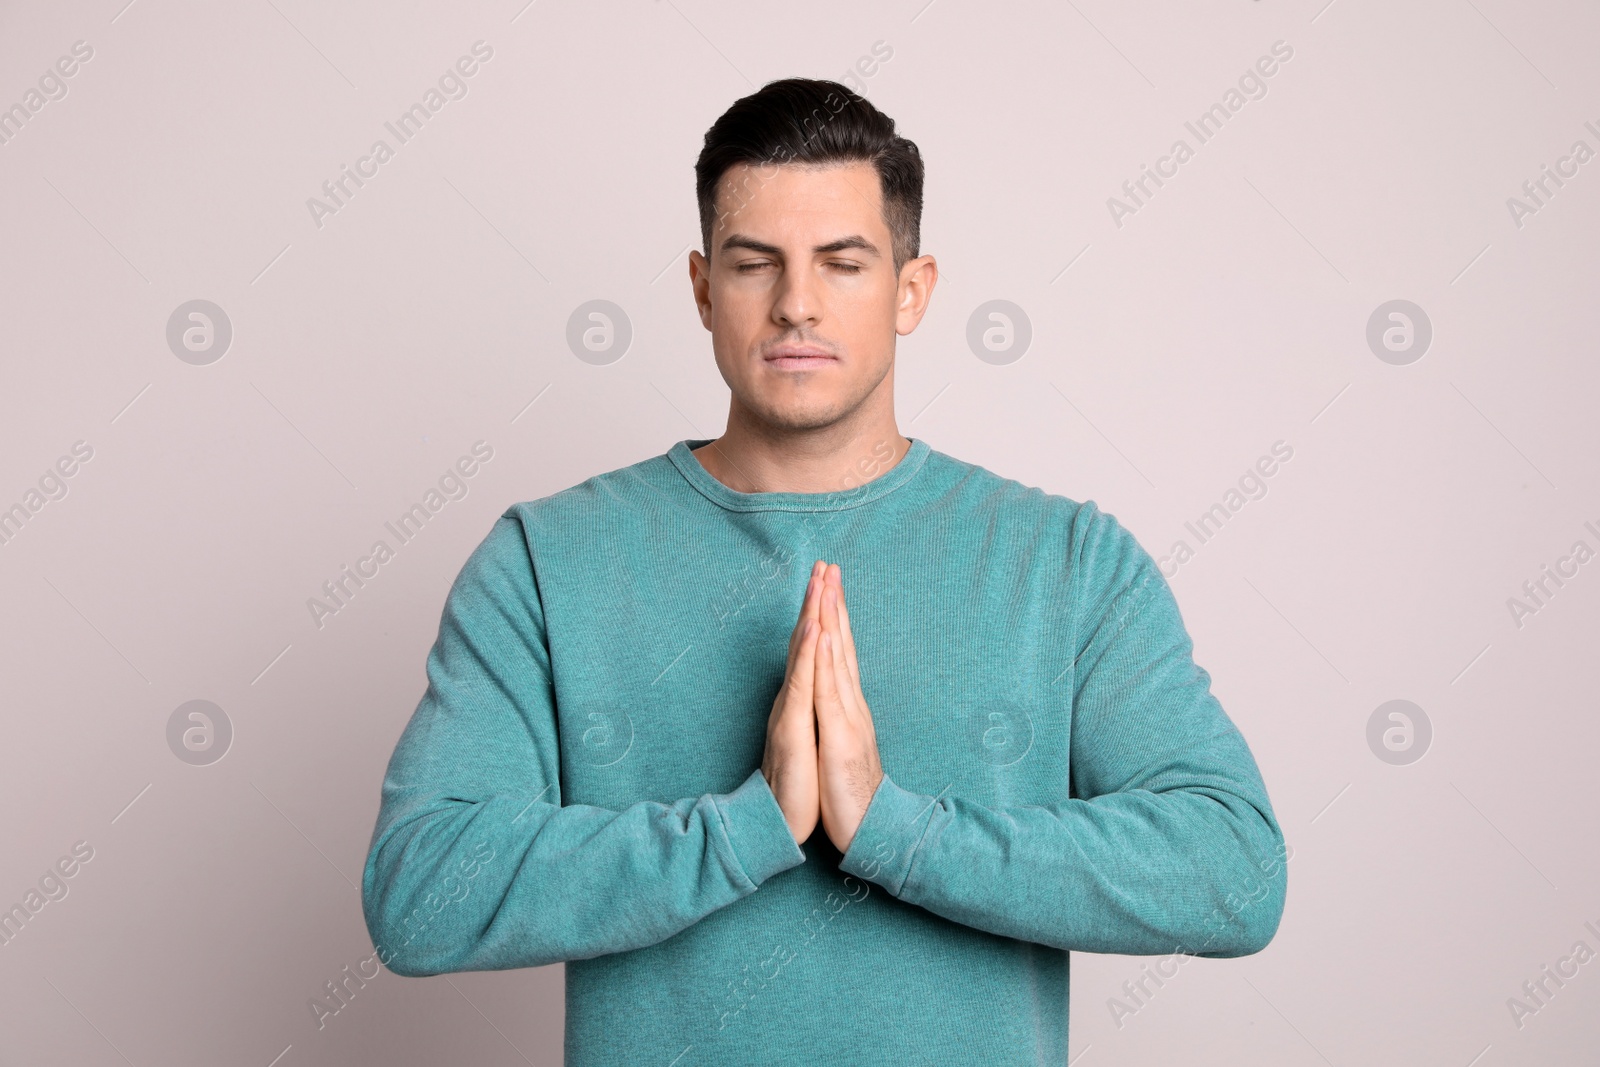 Photo of Man meditating on light background. Stress relief exercise